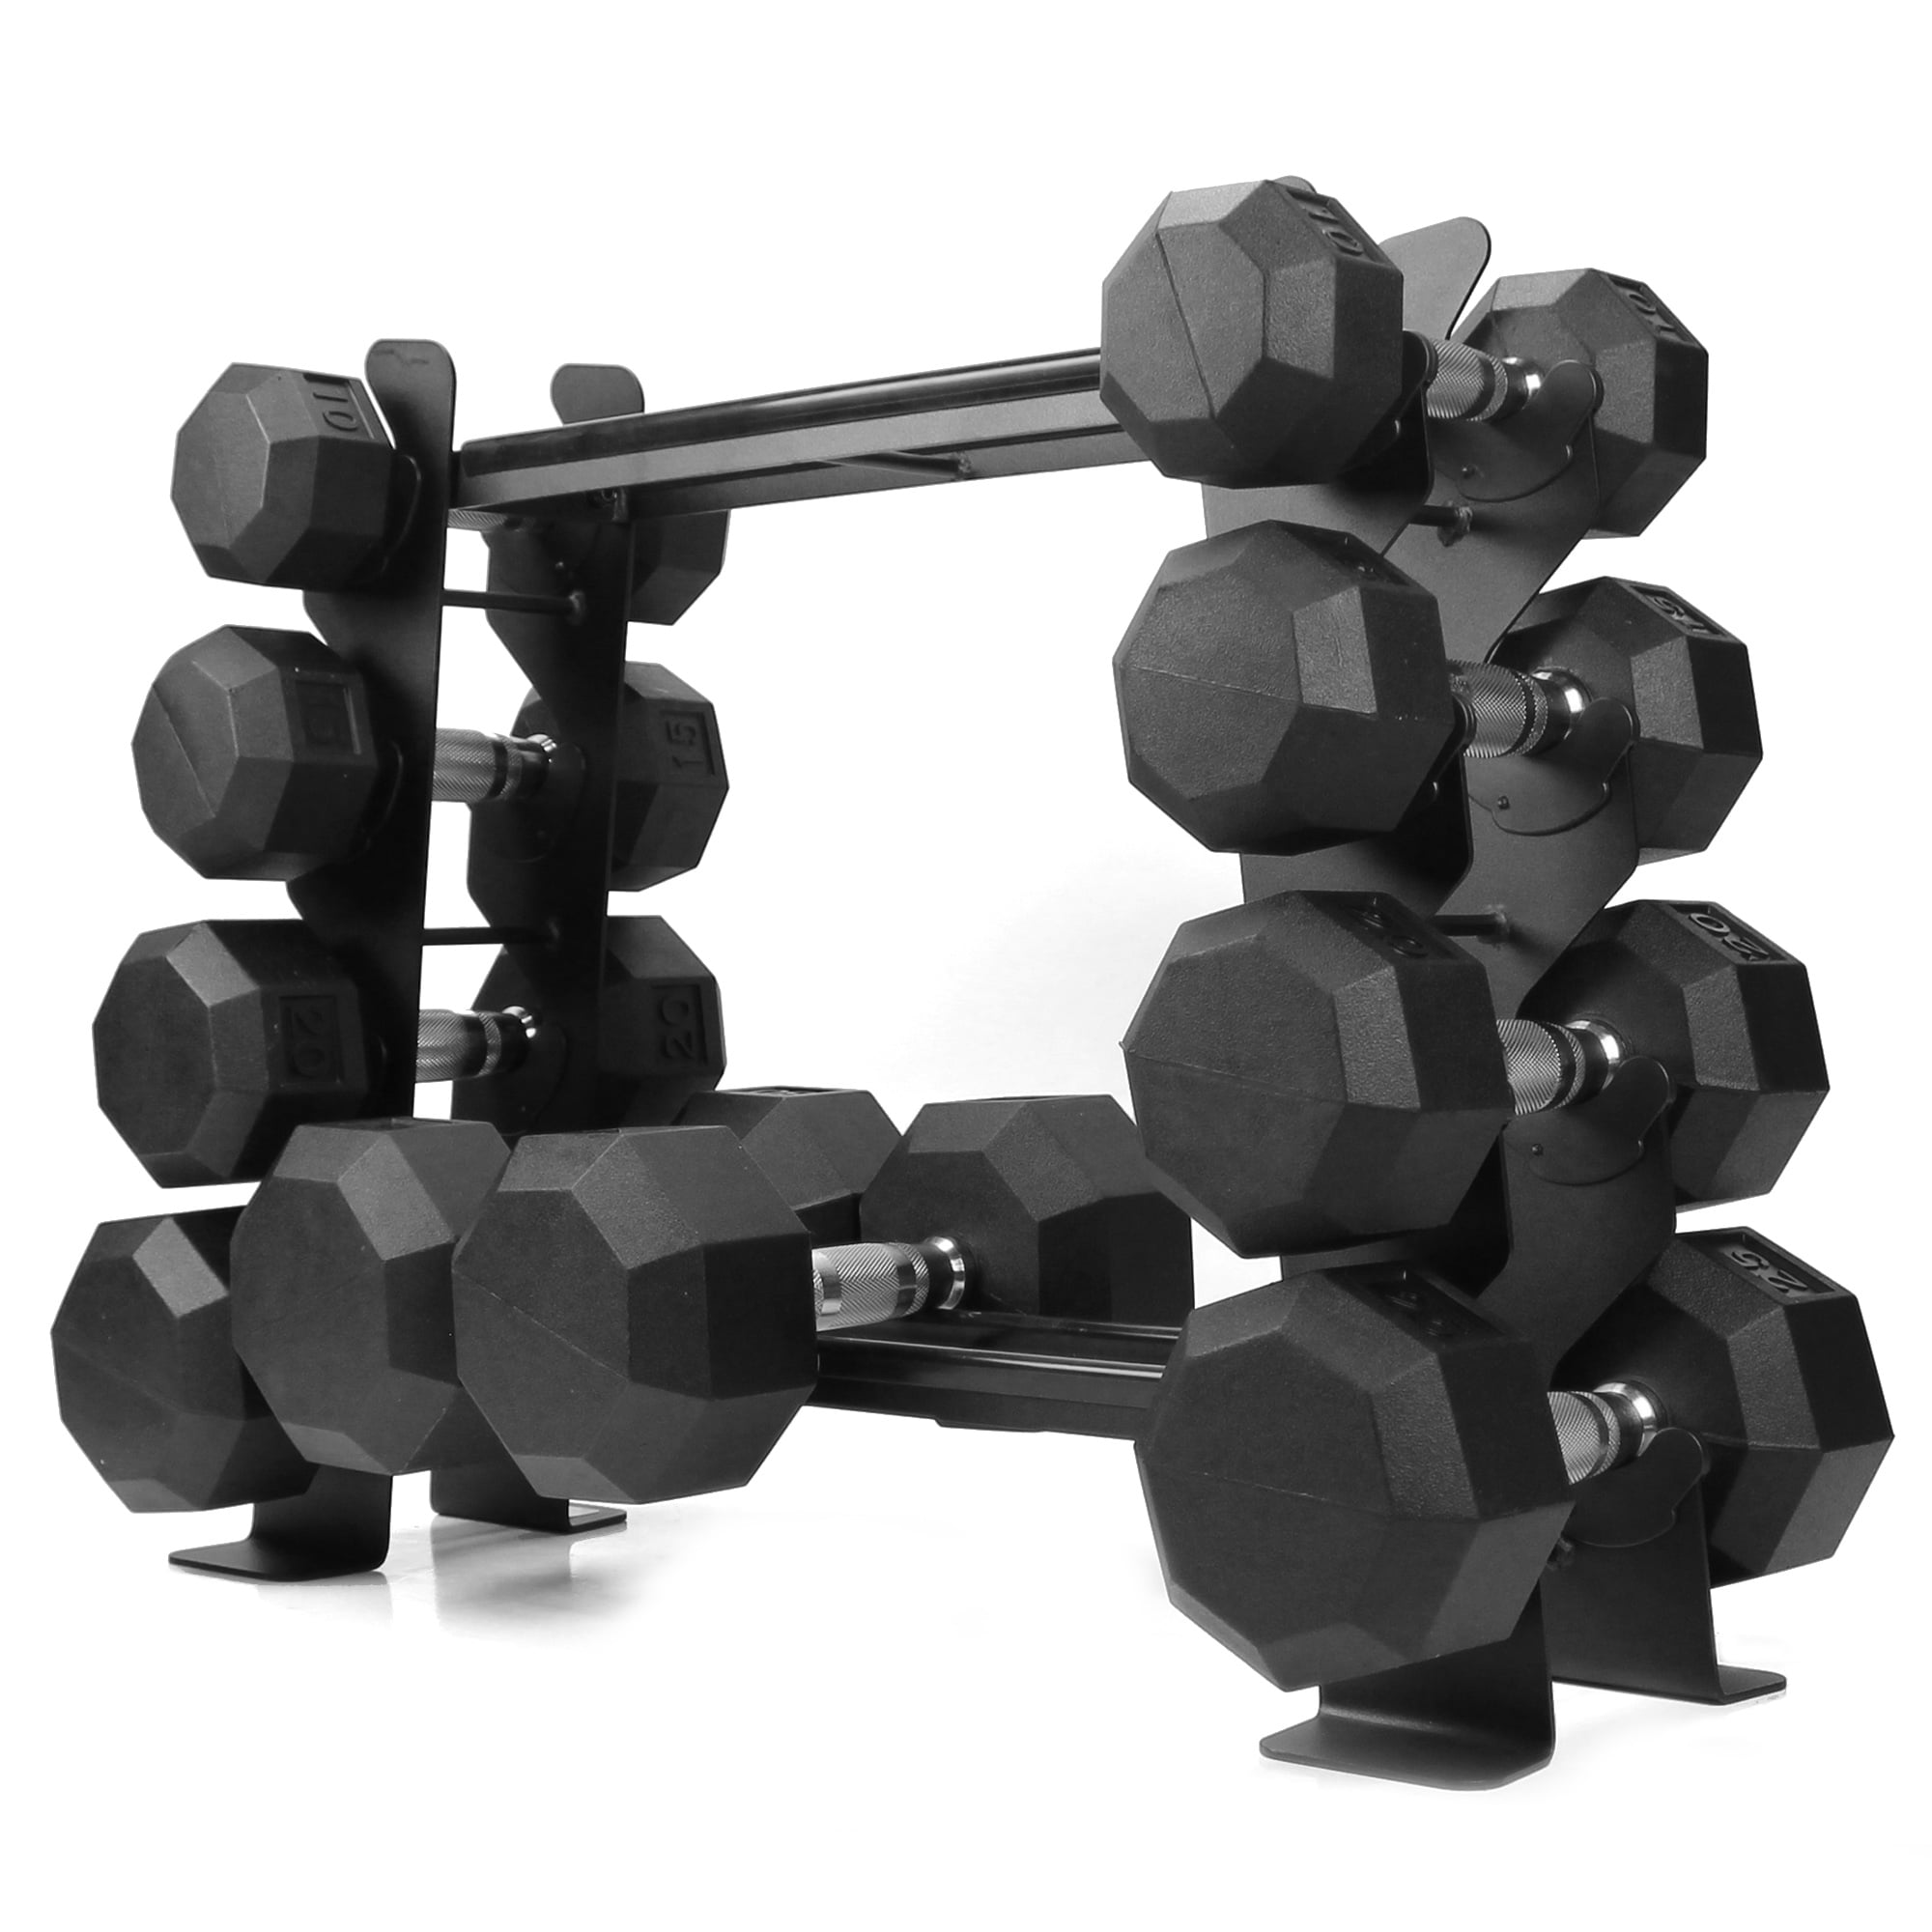 Weider Weight Plate and Barbell Storage Rack Compact Design 210 Lbs Max Weight 